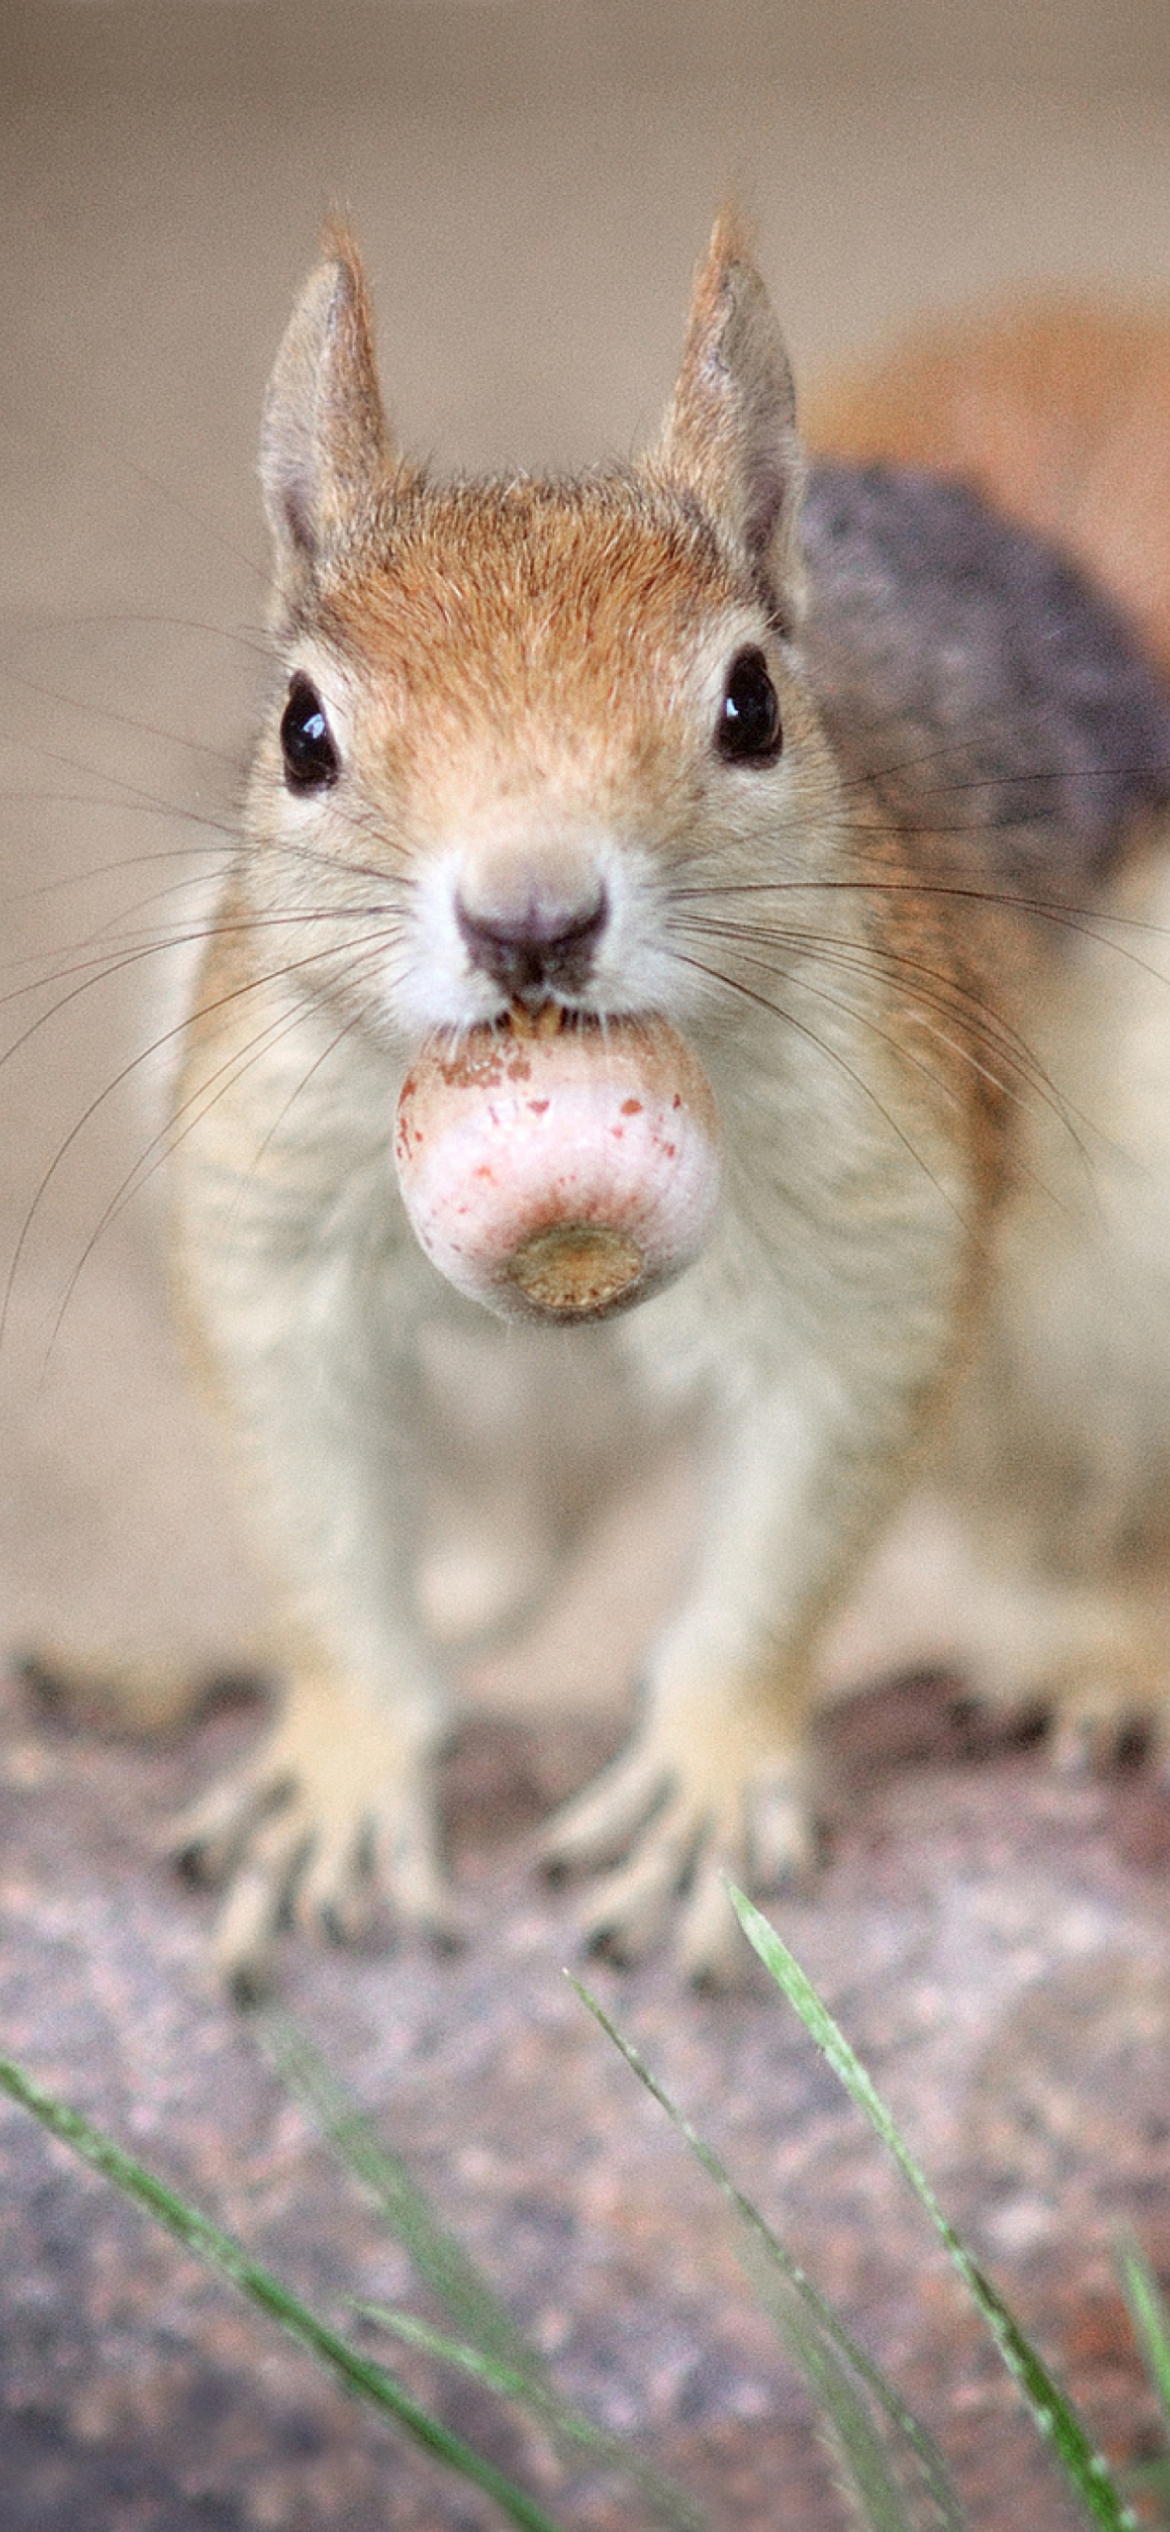 Funny Squirrel With Nut Wallpaper for iPhone XR